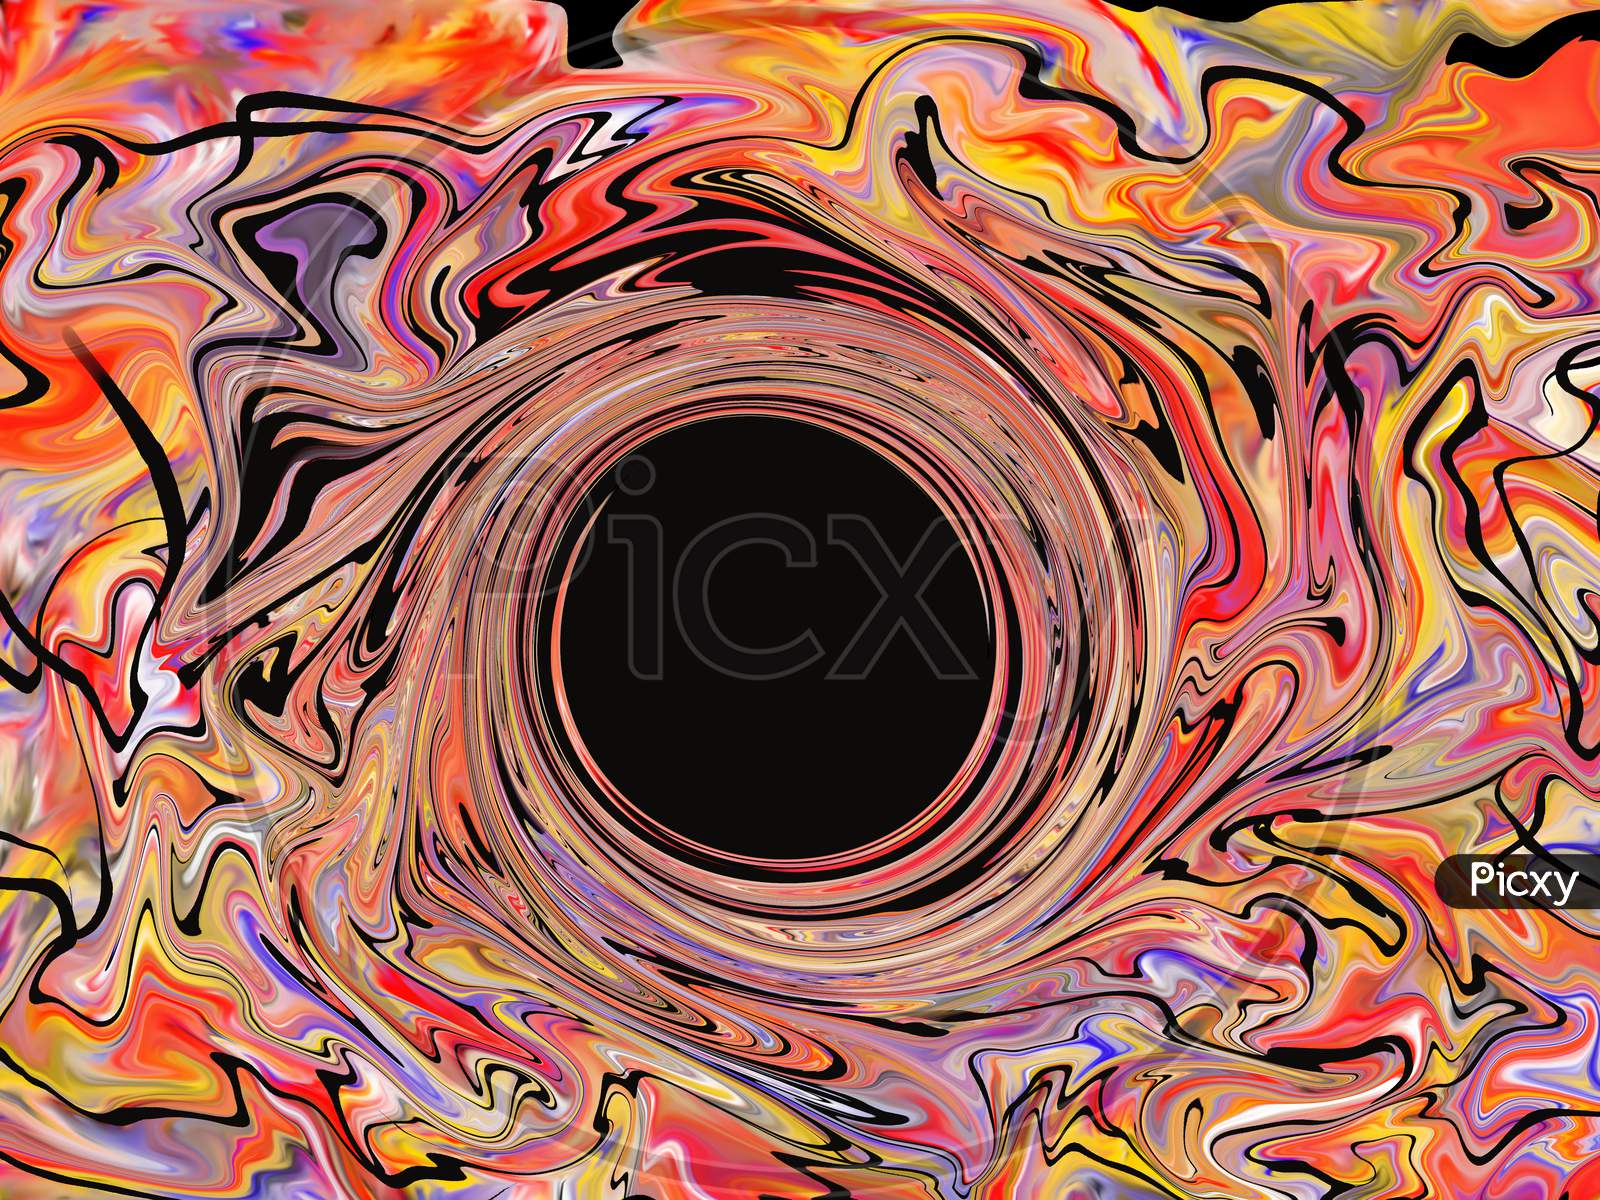 A Unique And Original Abstract Background Created By Several Bright Colors Of Paints Beginning To Blend And Flow Together On A Rotating Canvas